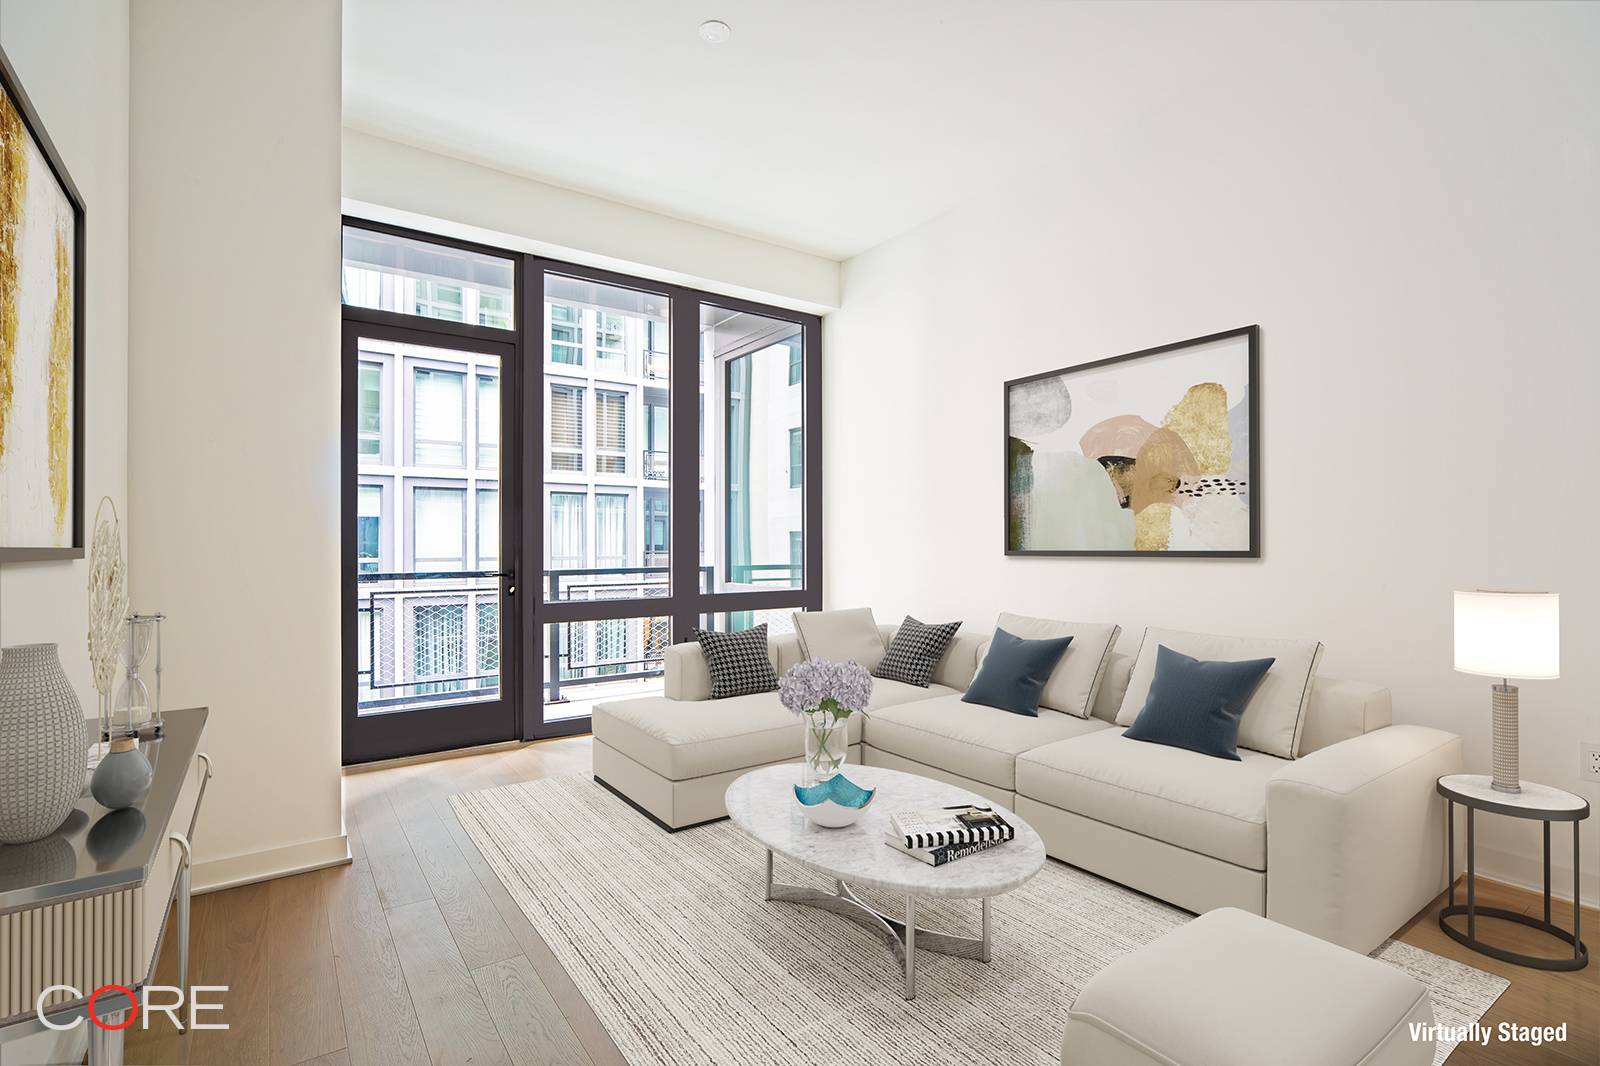 Welcome home to this luxurious one bedroom with a terrace that spans the entire length of the apartment.